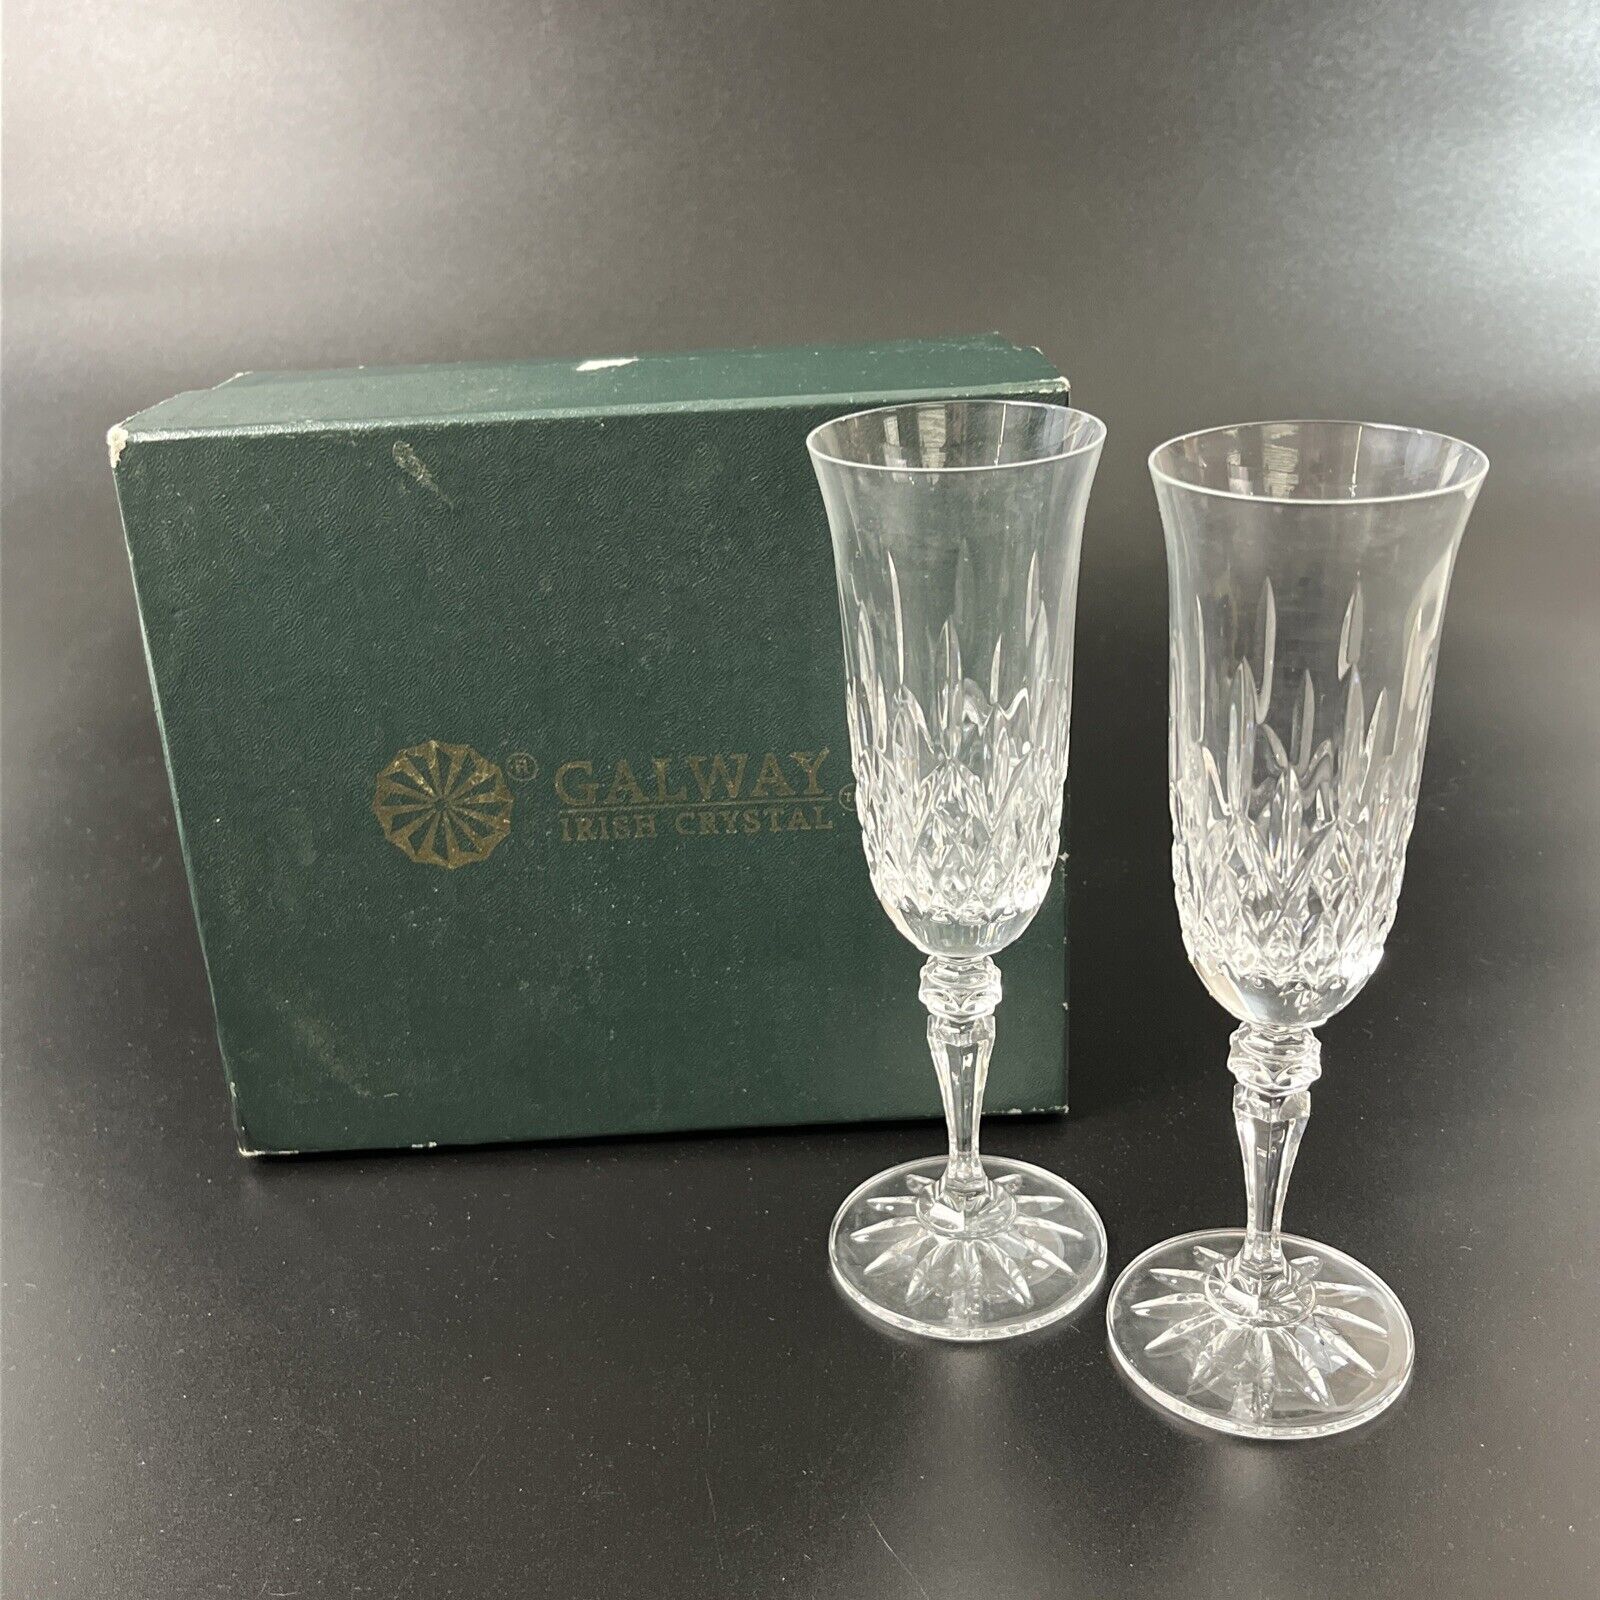 Vtg Galway Irish Longford Crystal Fluted Champagne Glasses Pair W/Box Set Flutes